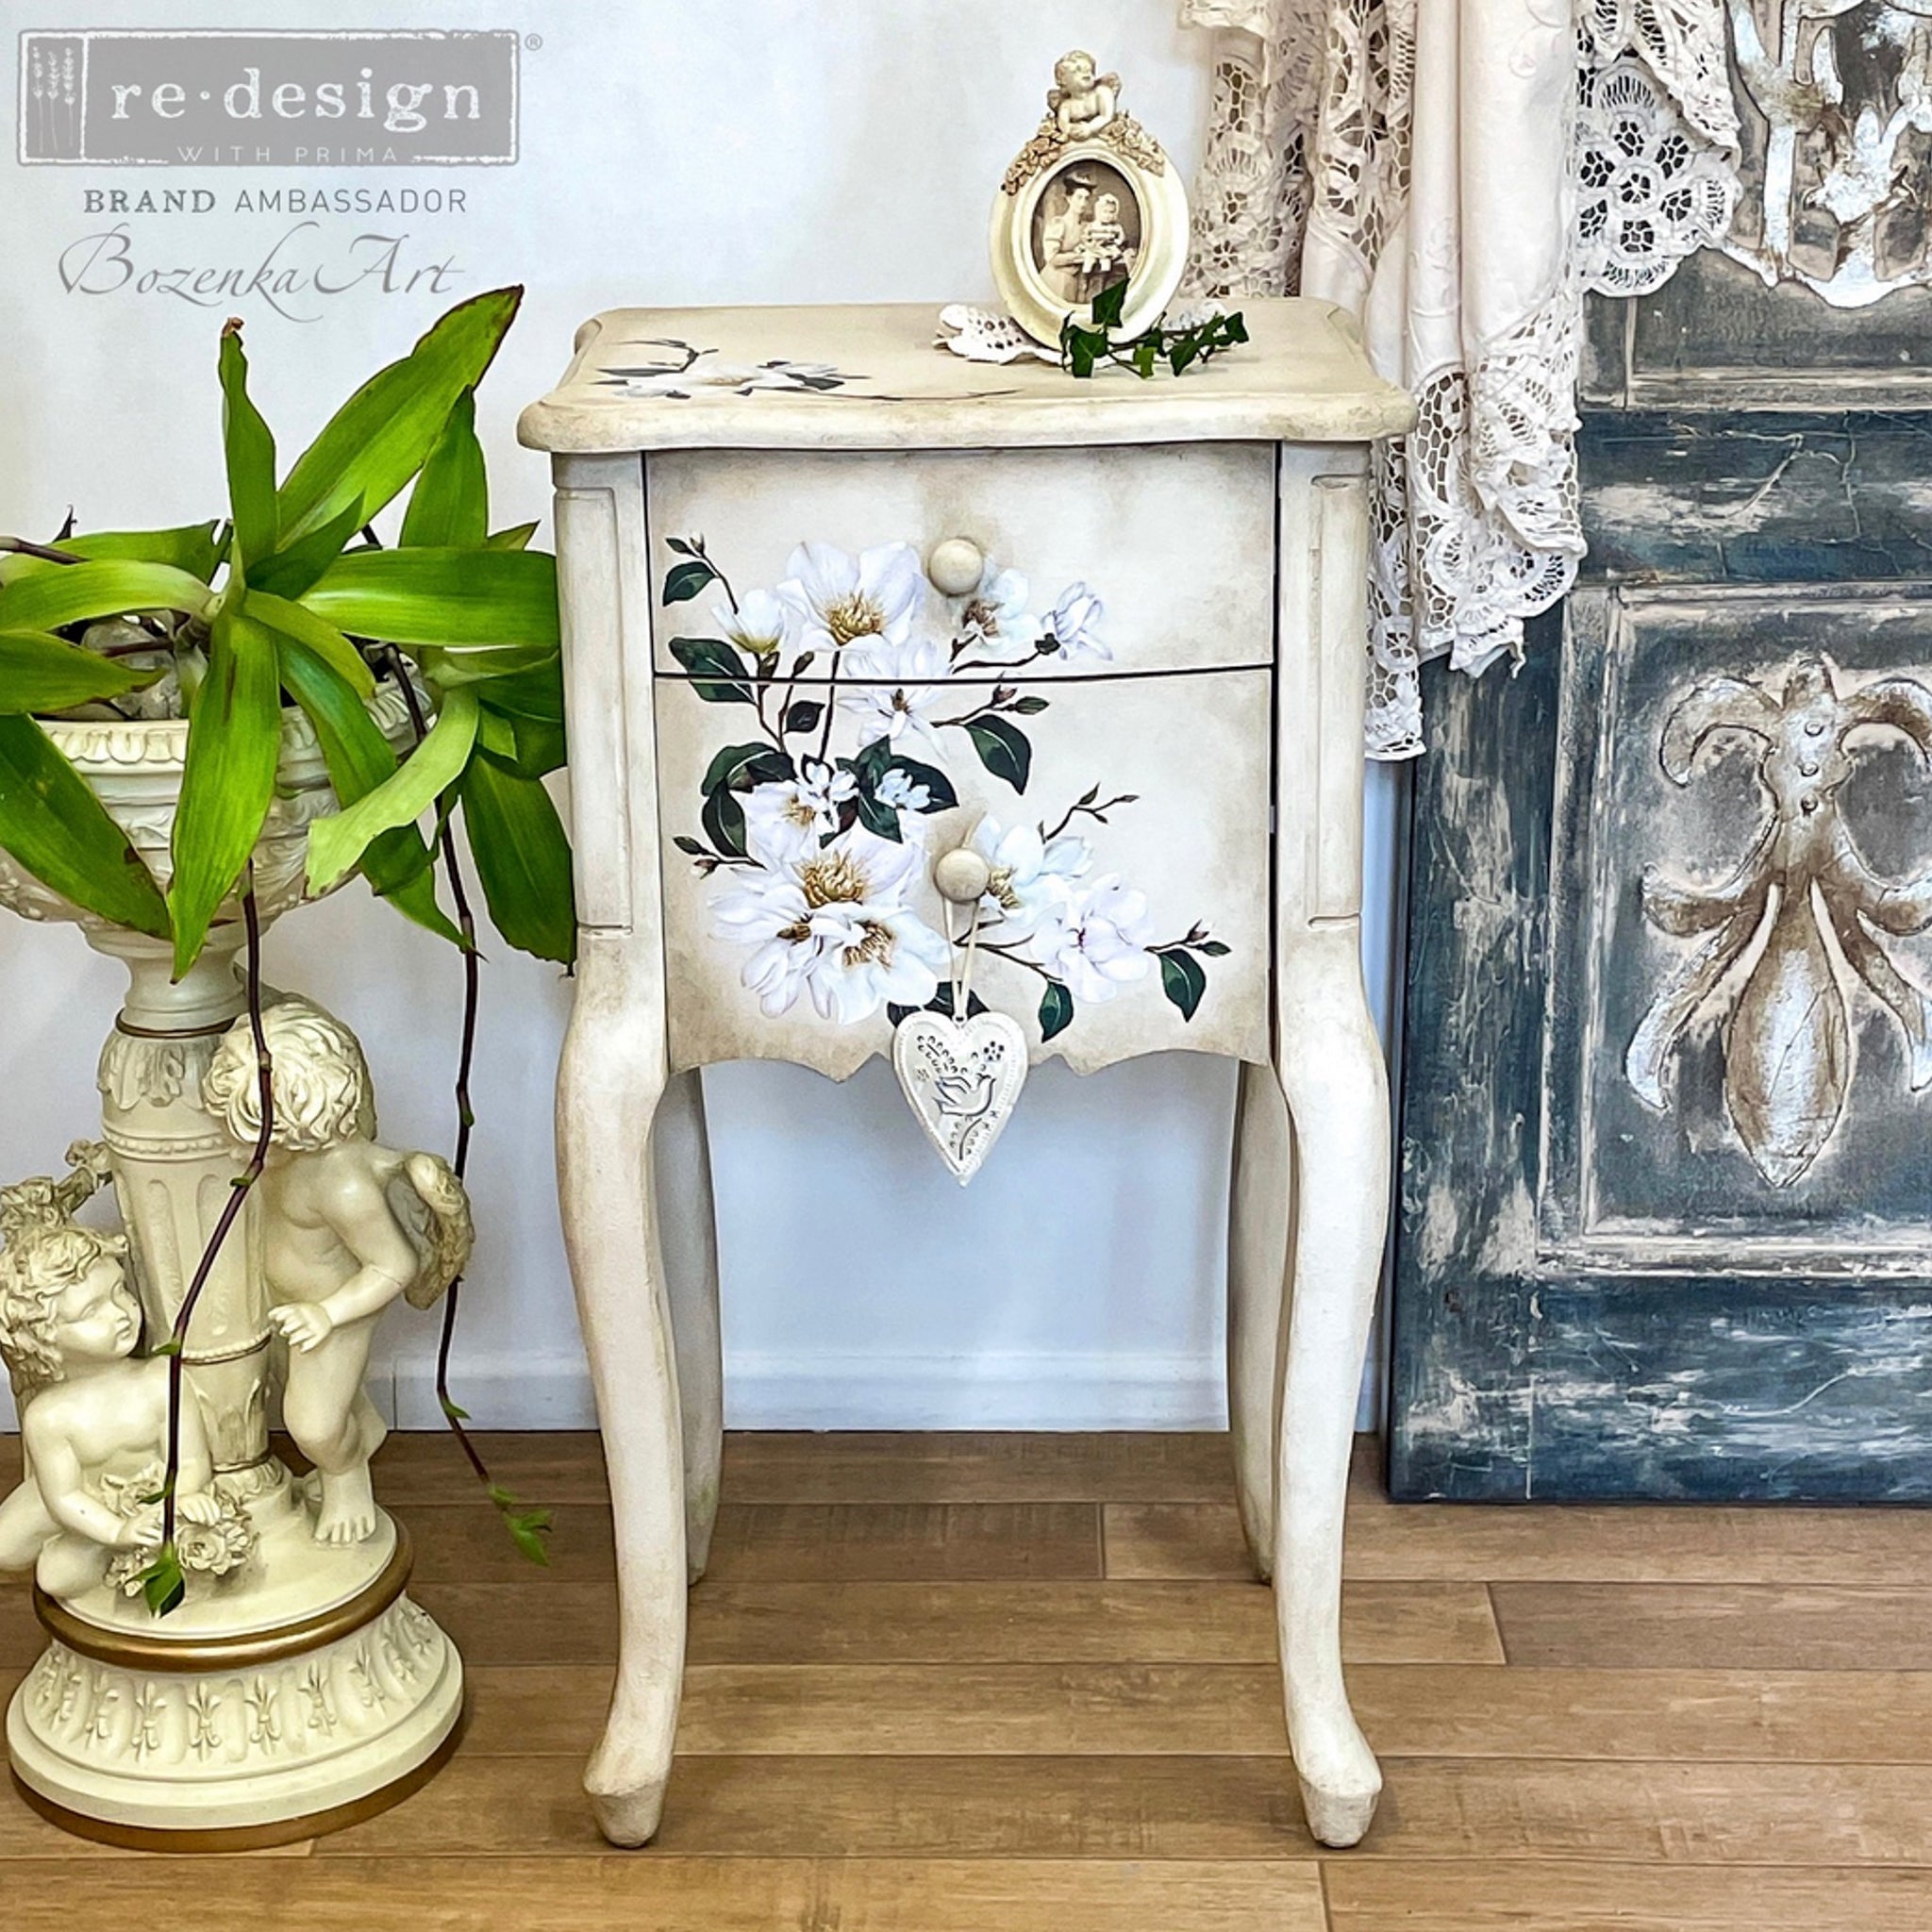 A vintage, small, 2-drawer nightstand refurbished by Bozenka Art is painted antique white and features ReDesign with Prima's White Magnolia Small transfer on it.